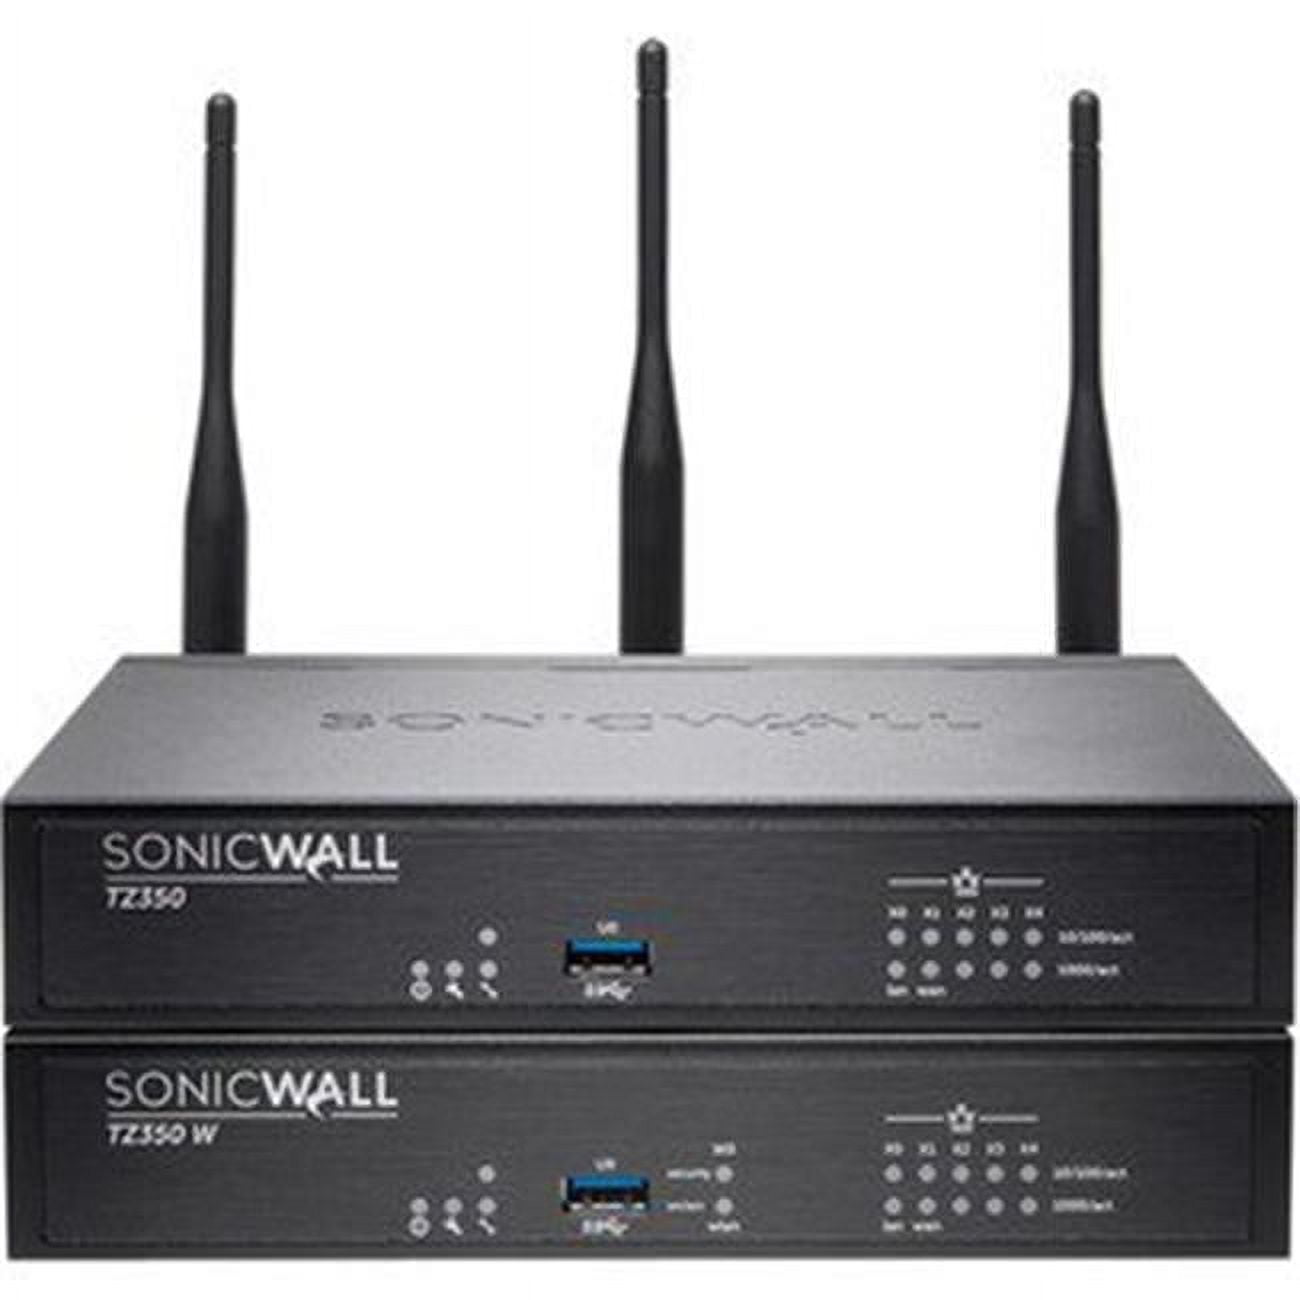 Dell Security Sonicwall Routers